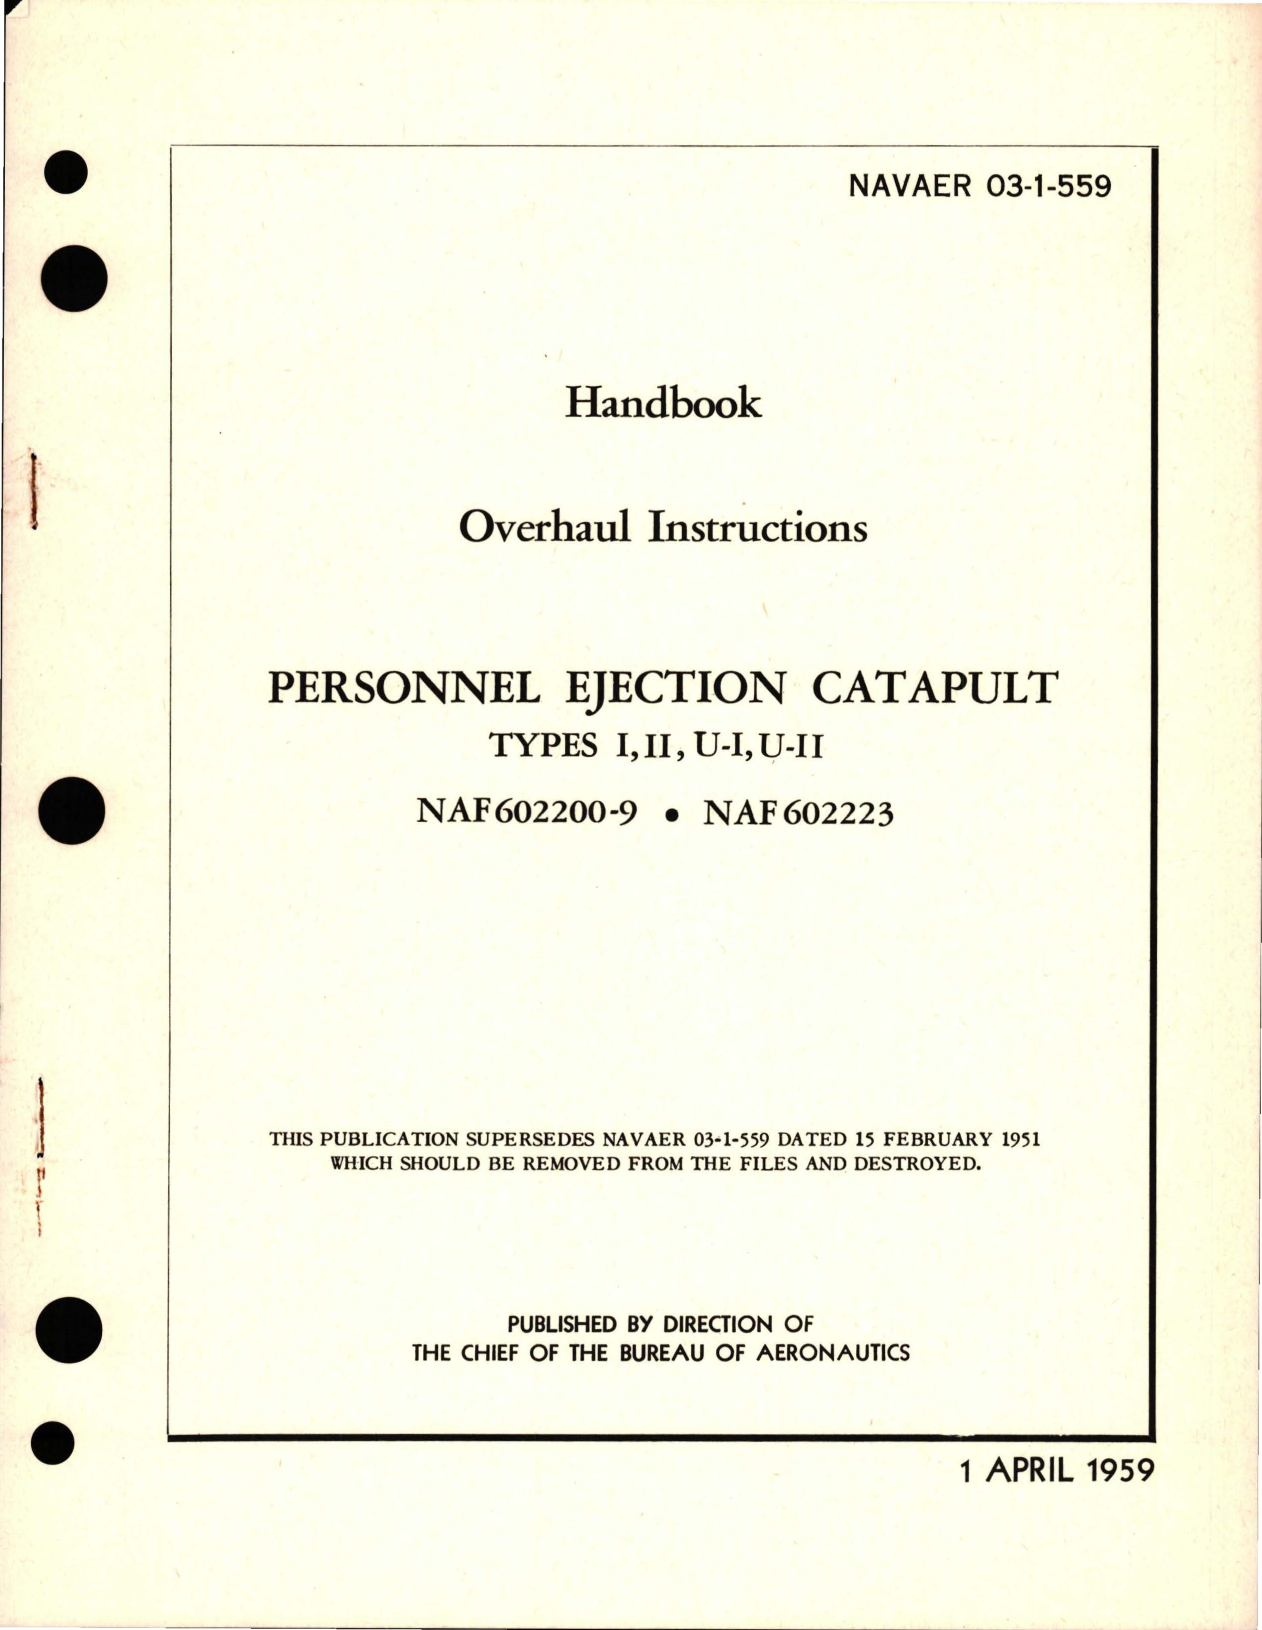 Sample page 1 from AirCorps Library document: Overhaul Instructions for Personnel Ejection Catapult - Types I, II, U-I, U-II - NAF602200-9 and NAF602223